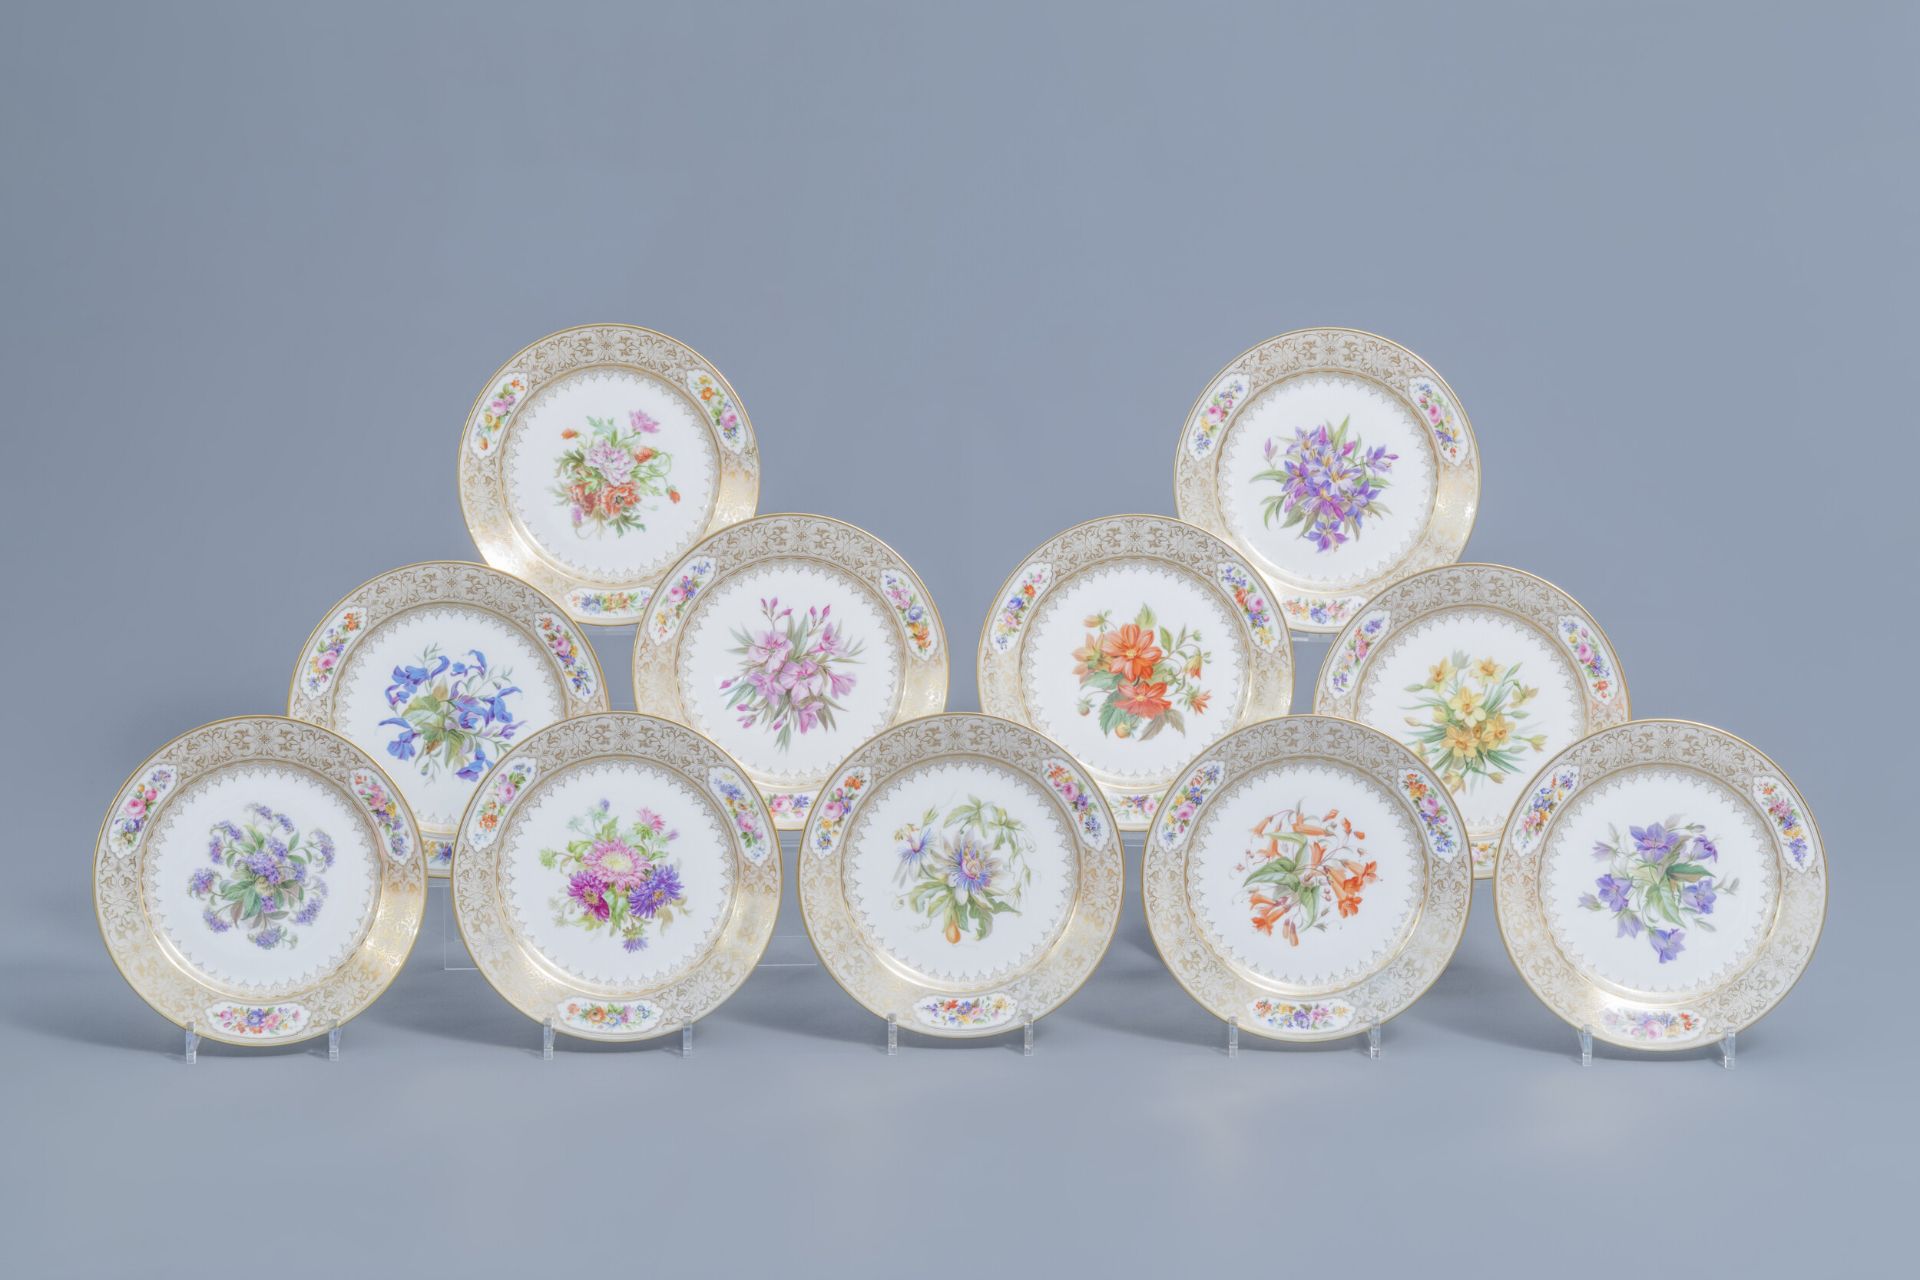 A set of eleven French plates with gilt and polychrome floral design, Svres mark, 19th C.